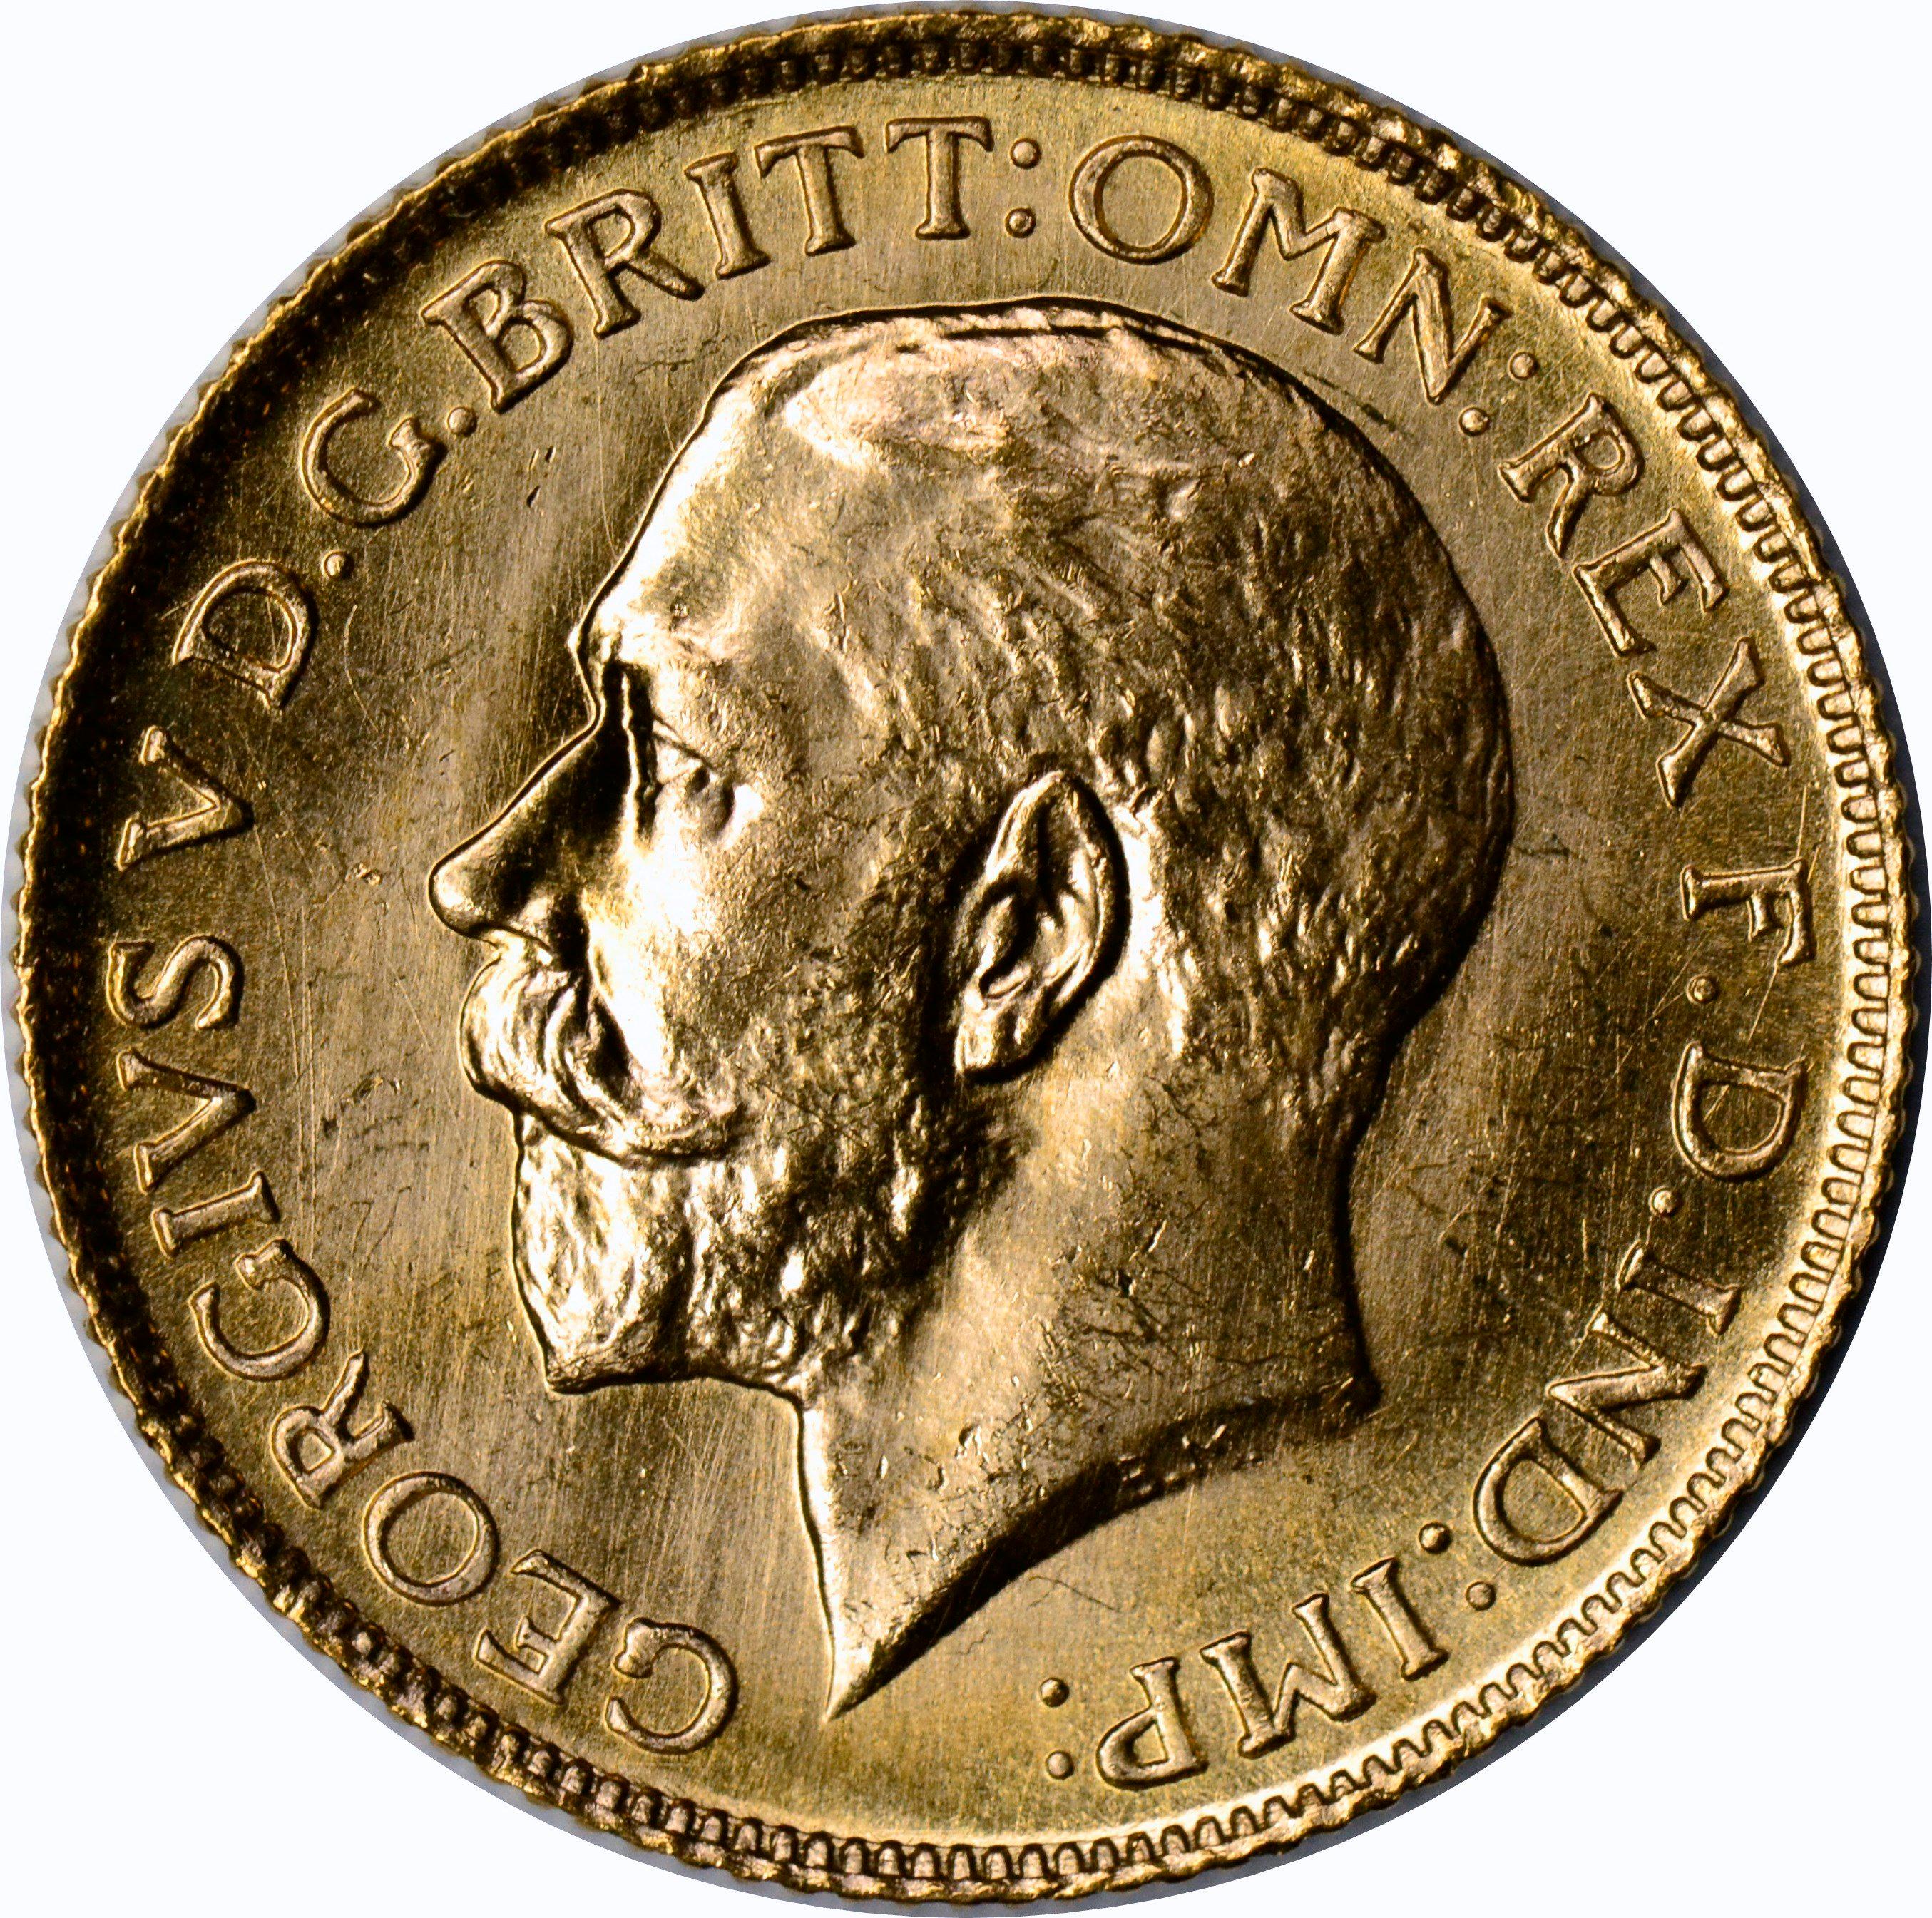 GREAT BRITAIN - 1925 GOLD SOVEREIGN